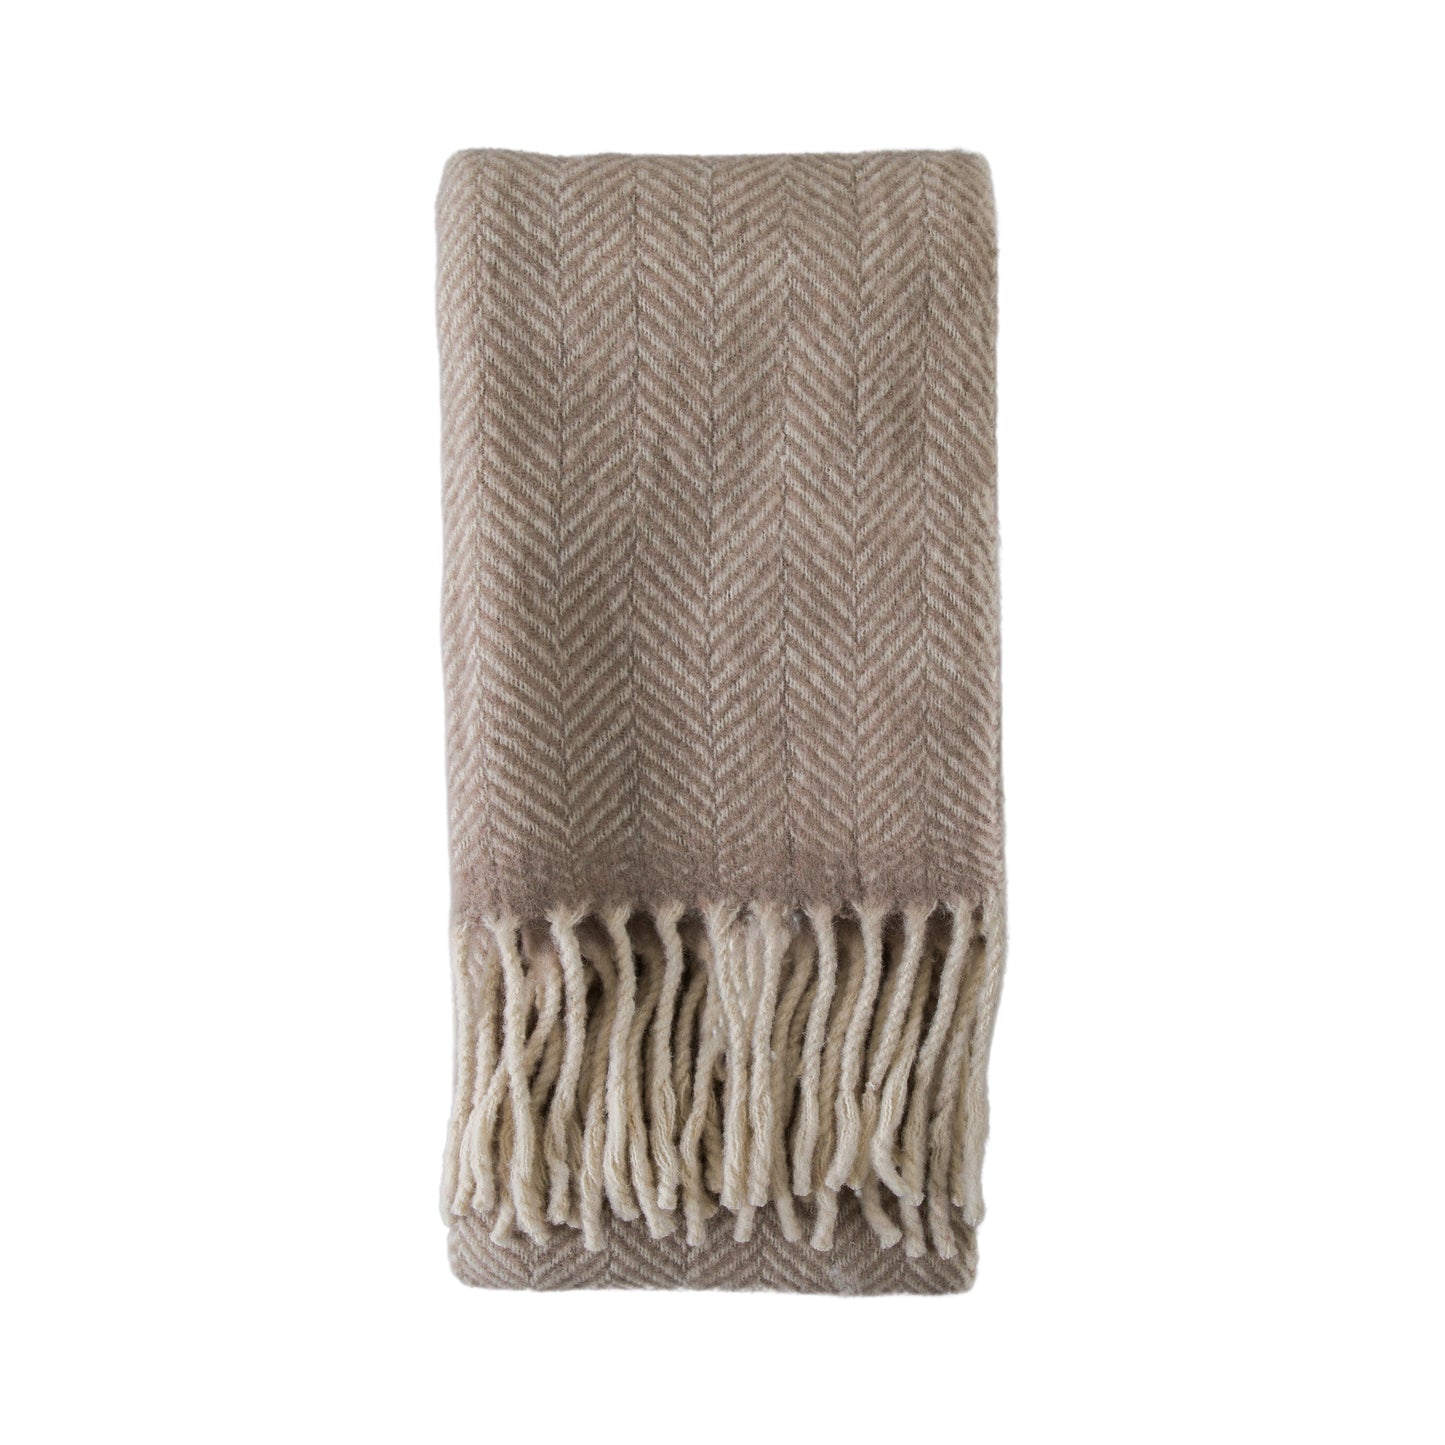 A Wool Throw with fringes from Kikiathome.co.uk for interior decor.